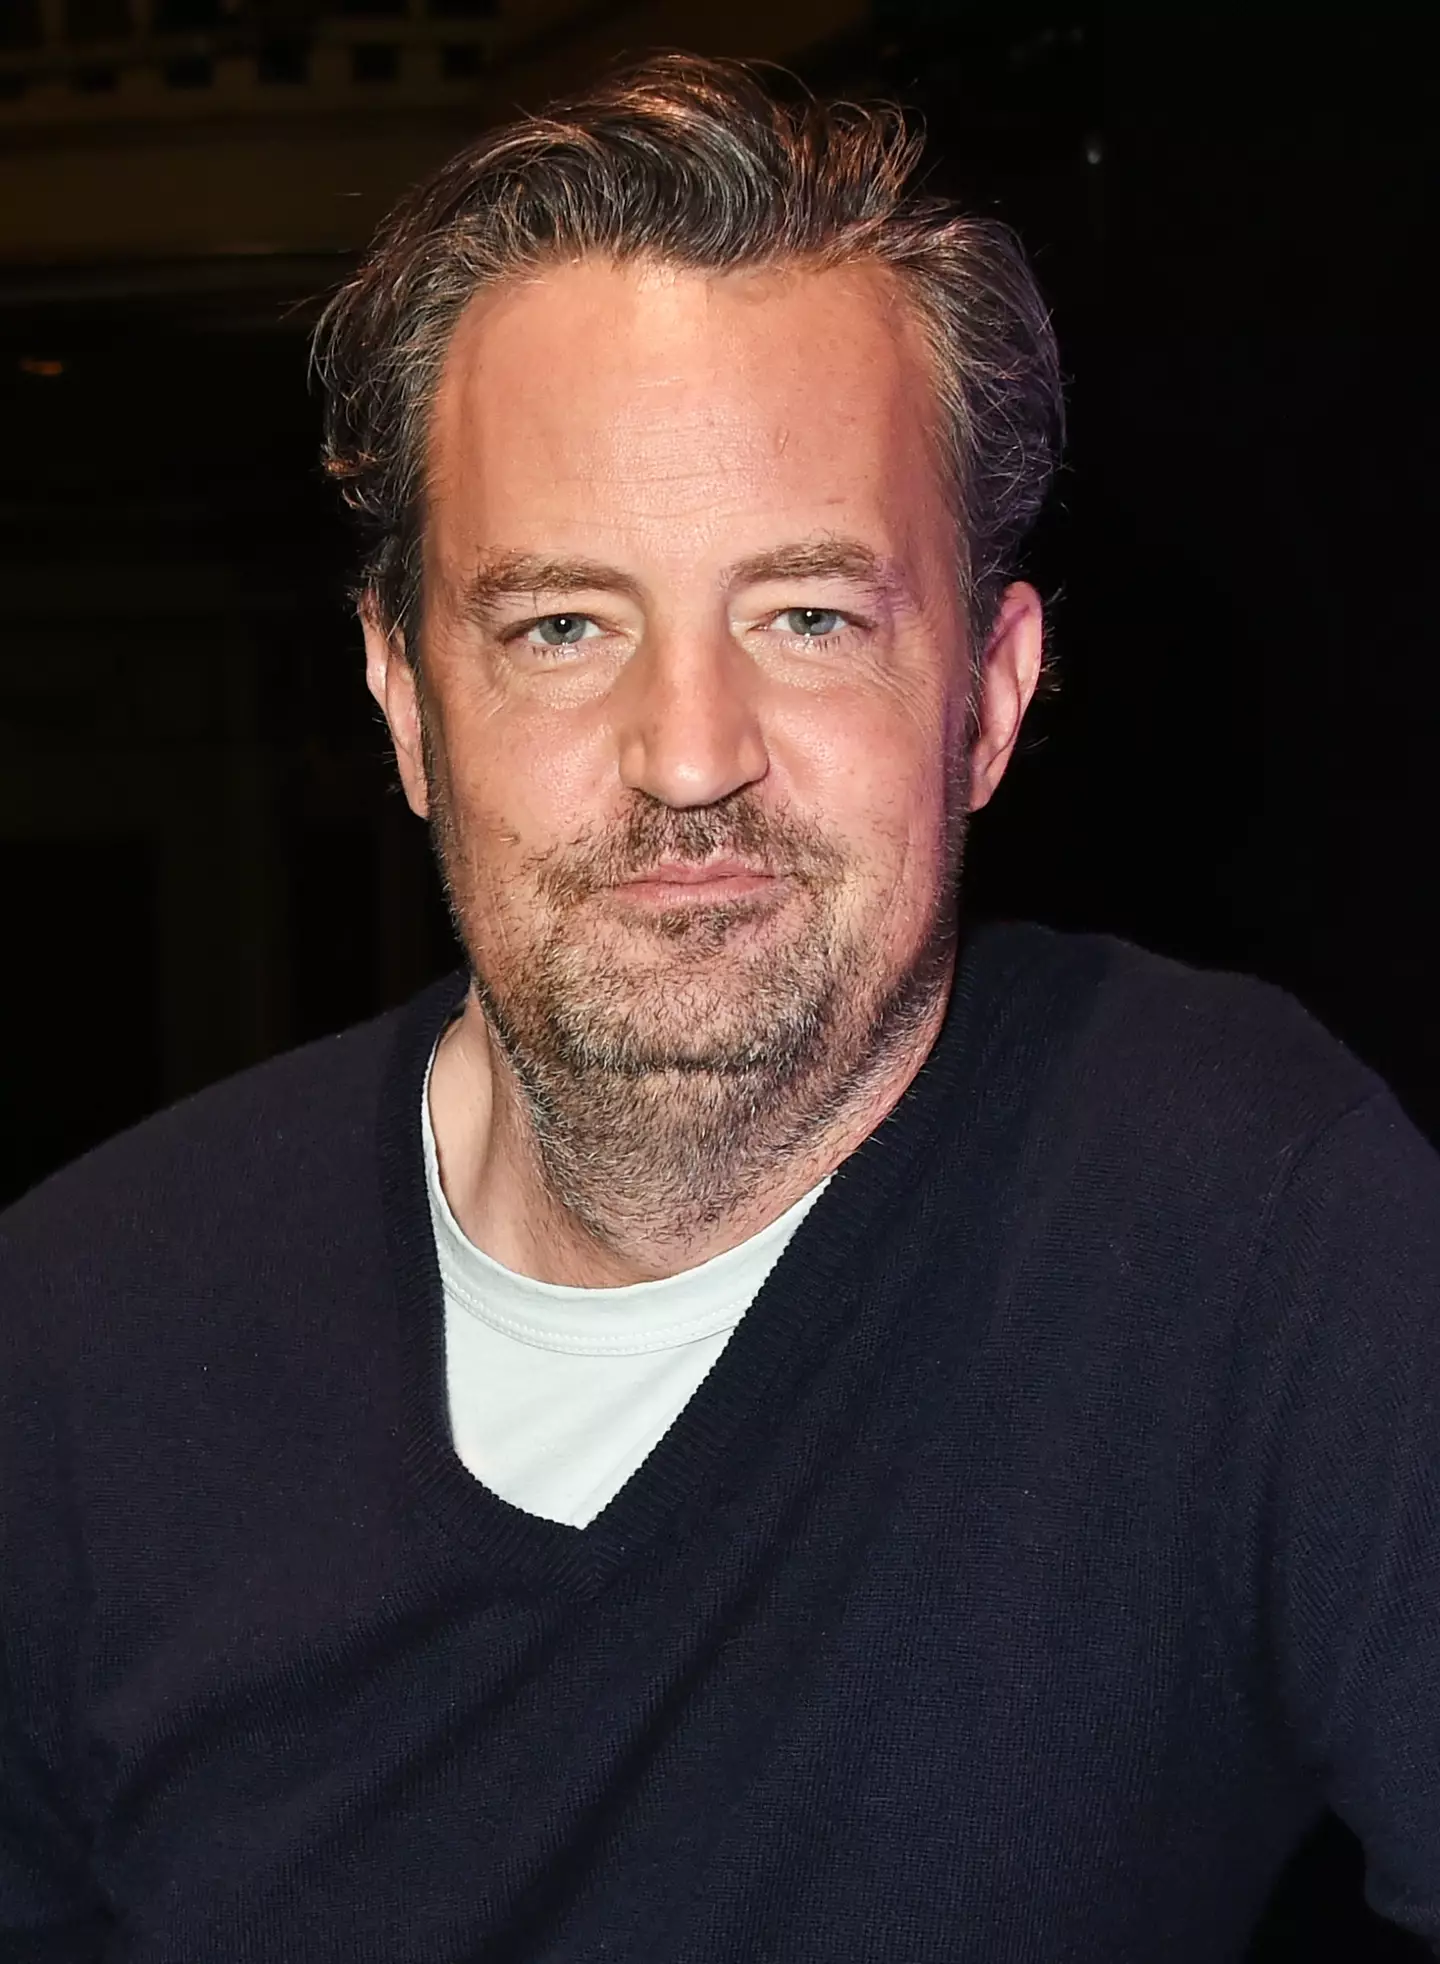 Matthew Perry's caused of death was determined to be the 'acute effects of ketamine' according to an autopsy report.